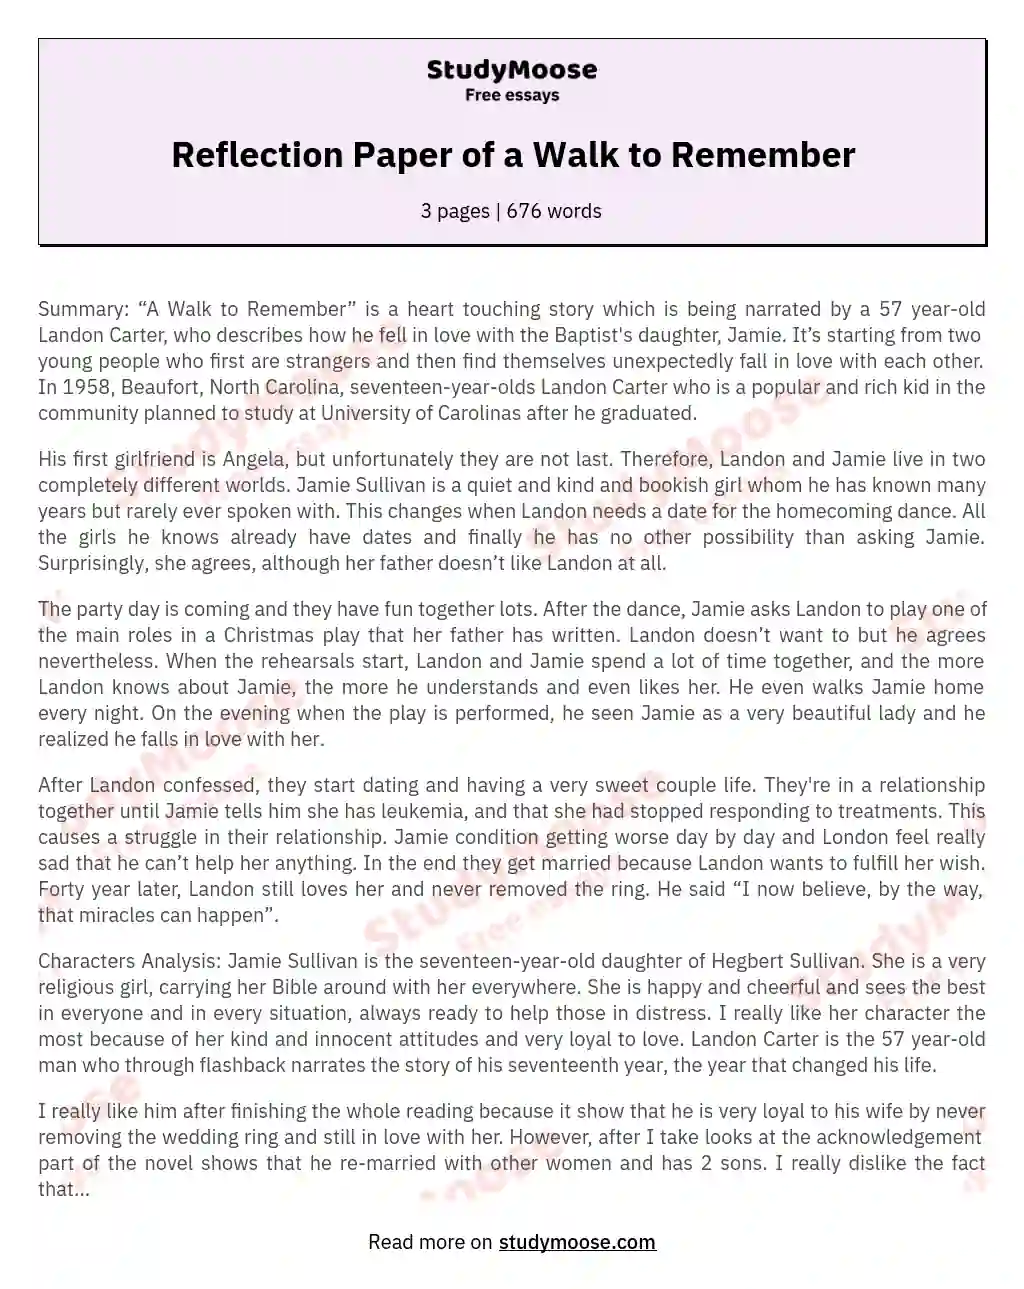 Reflection Paper of a Walk to Remember essay